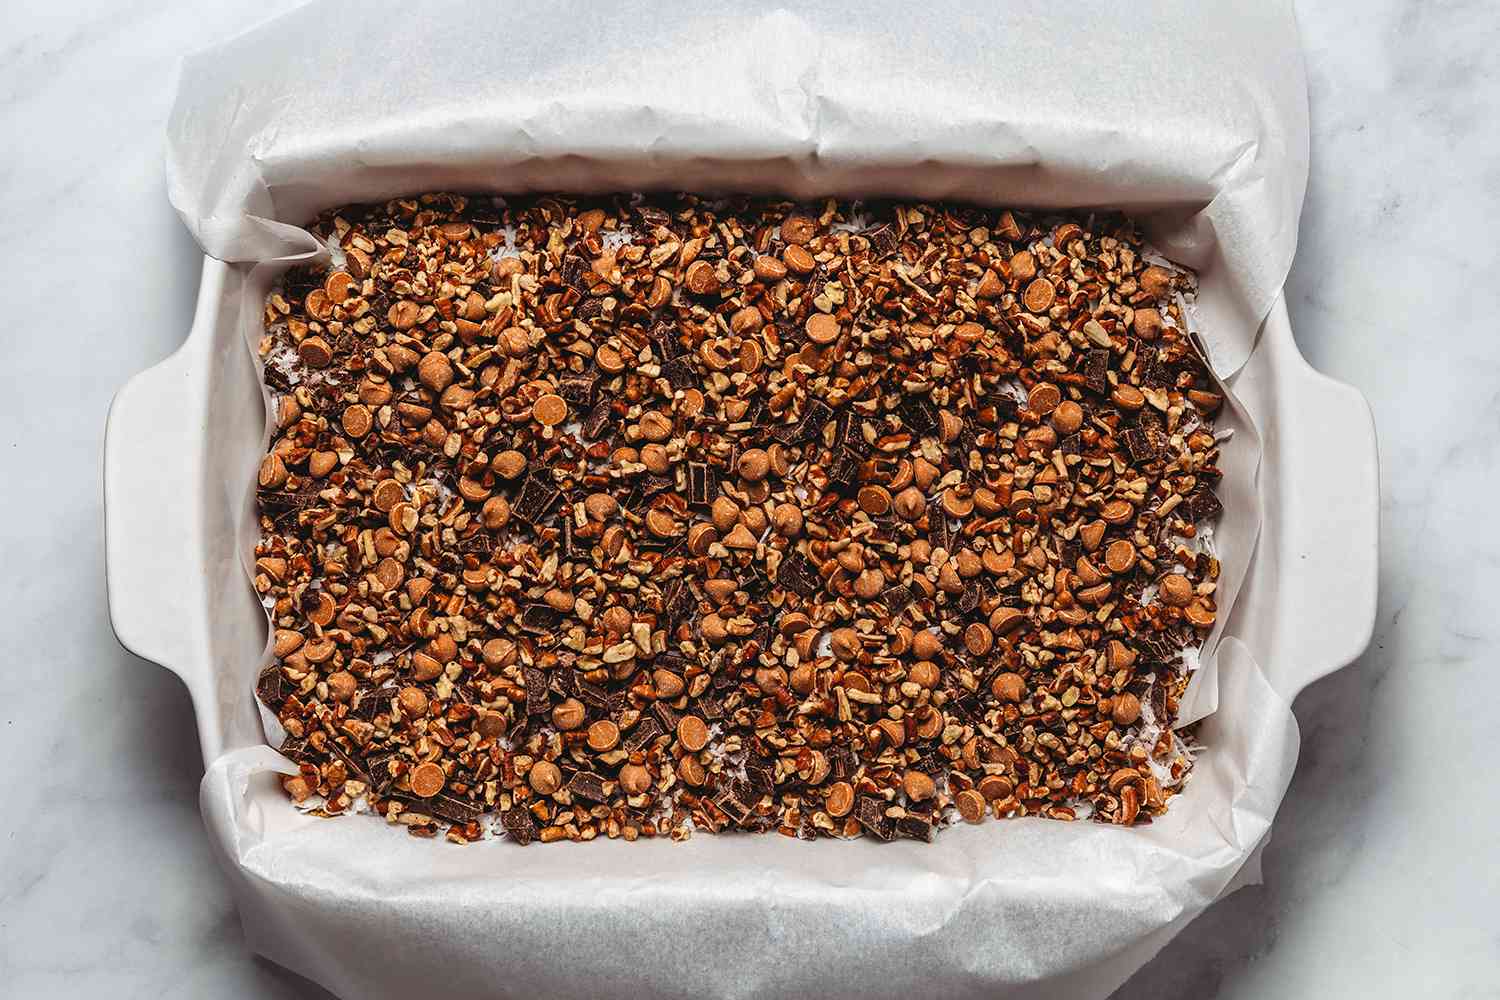 Chocolate, butterscotch, and nuts on top of the coconut flakes in the prepare baking dish